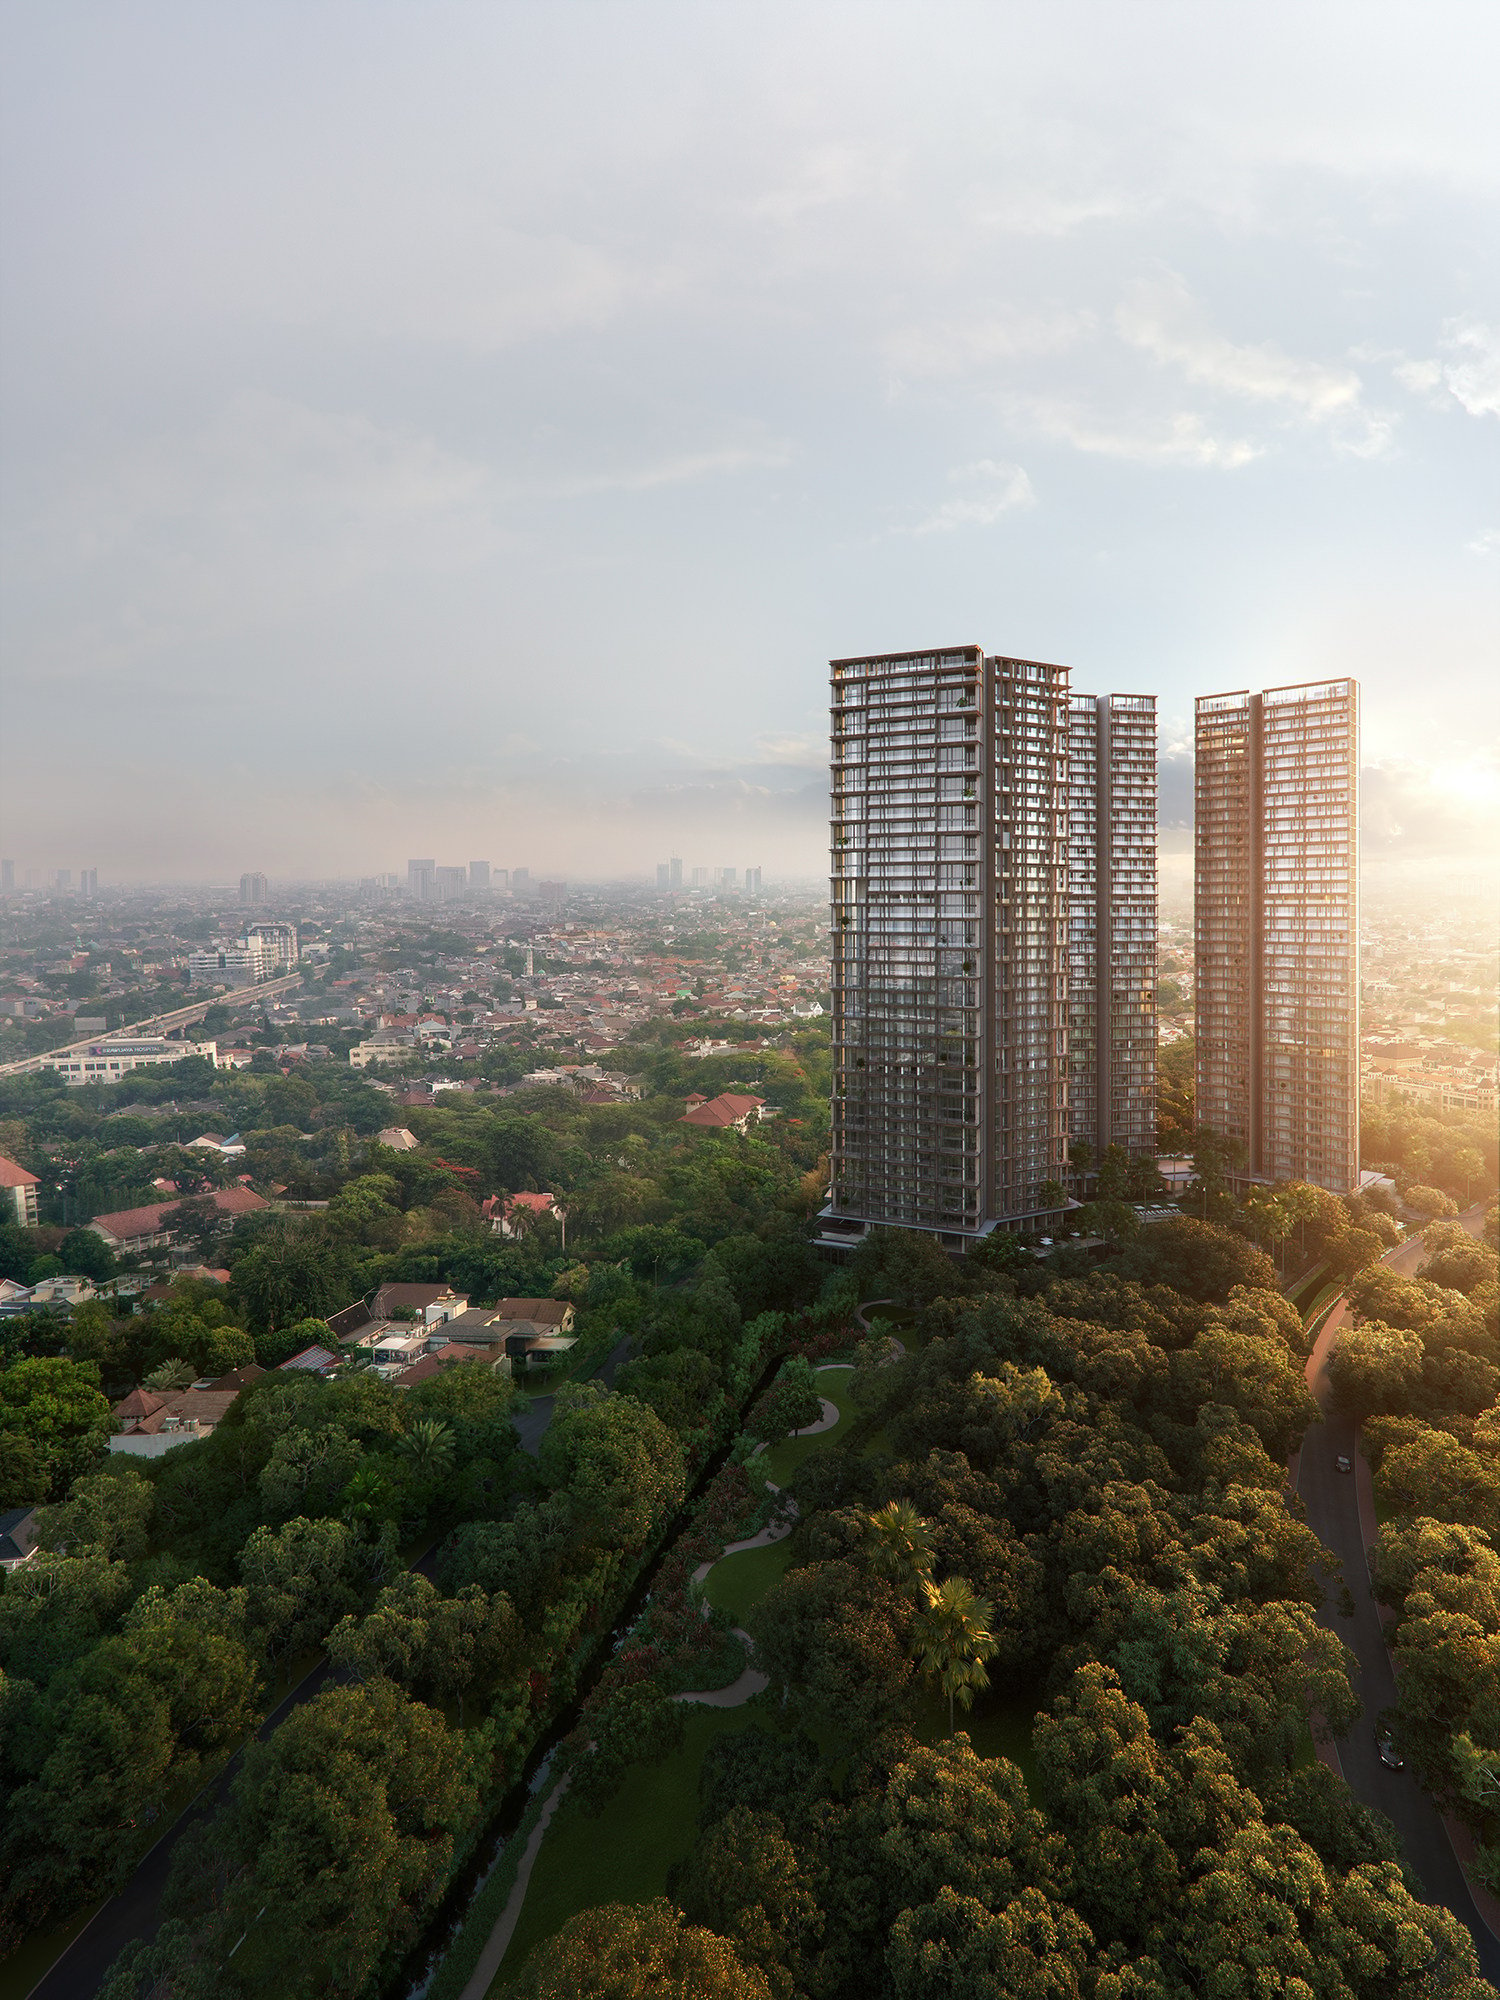 Savyavasa, a joint venture between Hong Kong’s Swire Properties and Indonesia’s Jakarta Setiabudi International Group, will have about 400 units. Photo: Handout